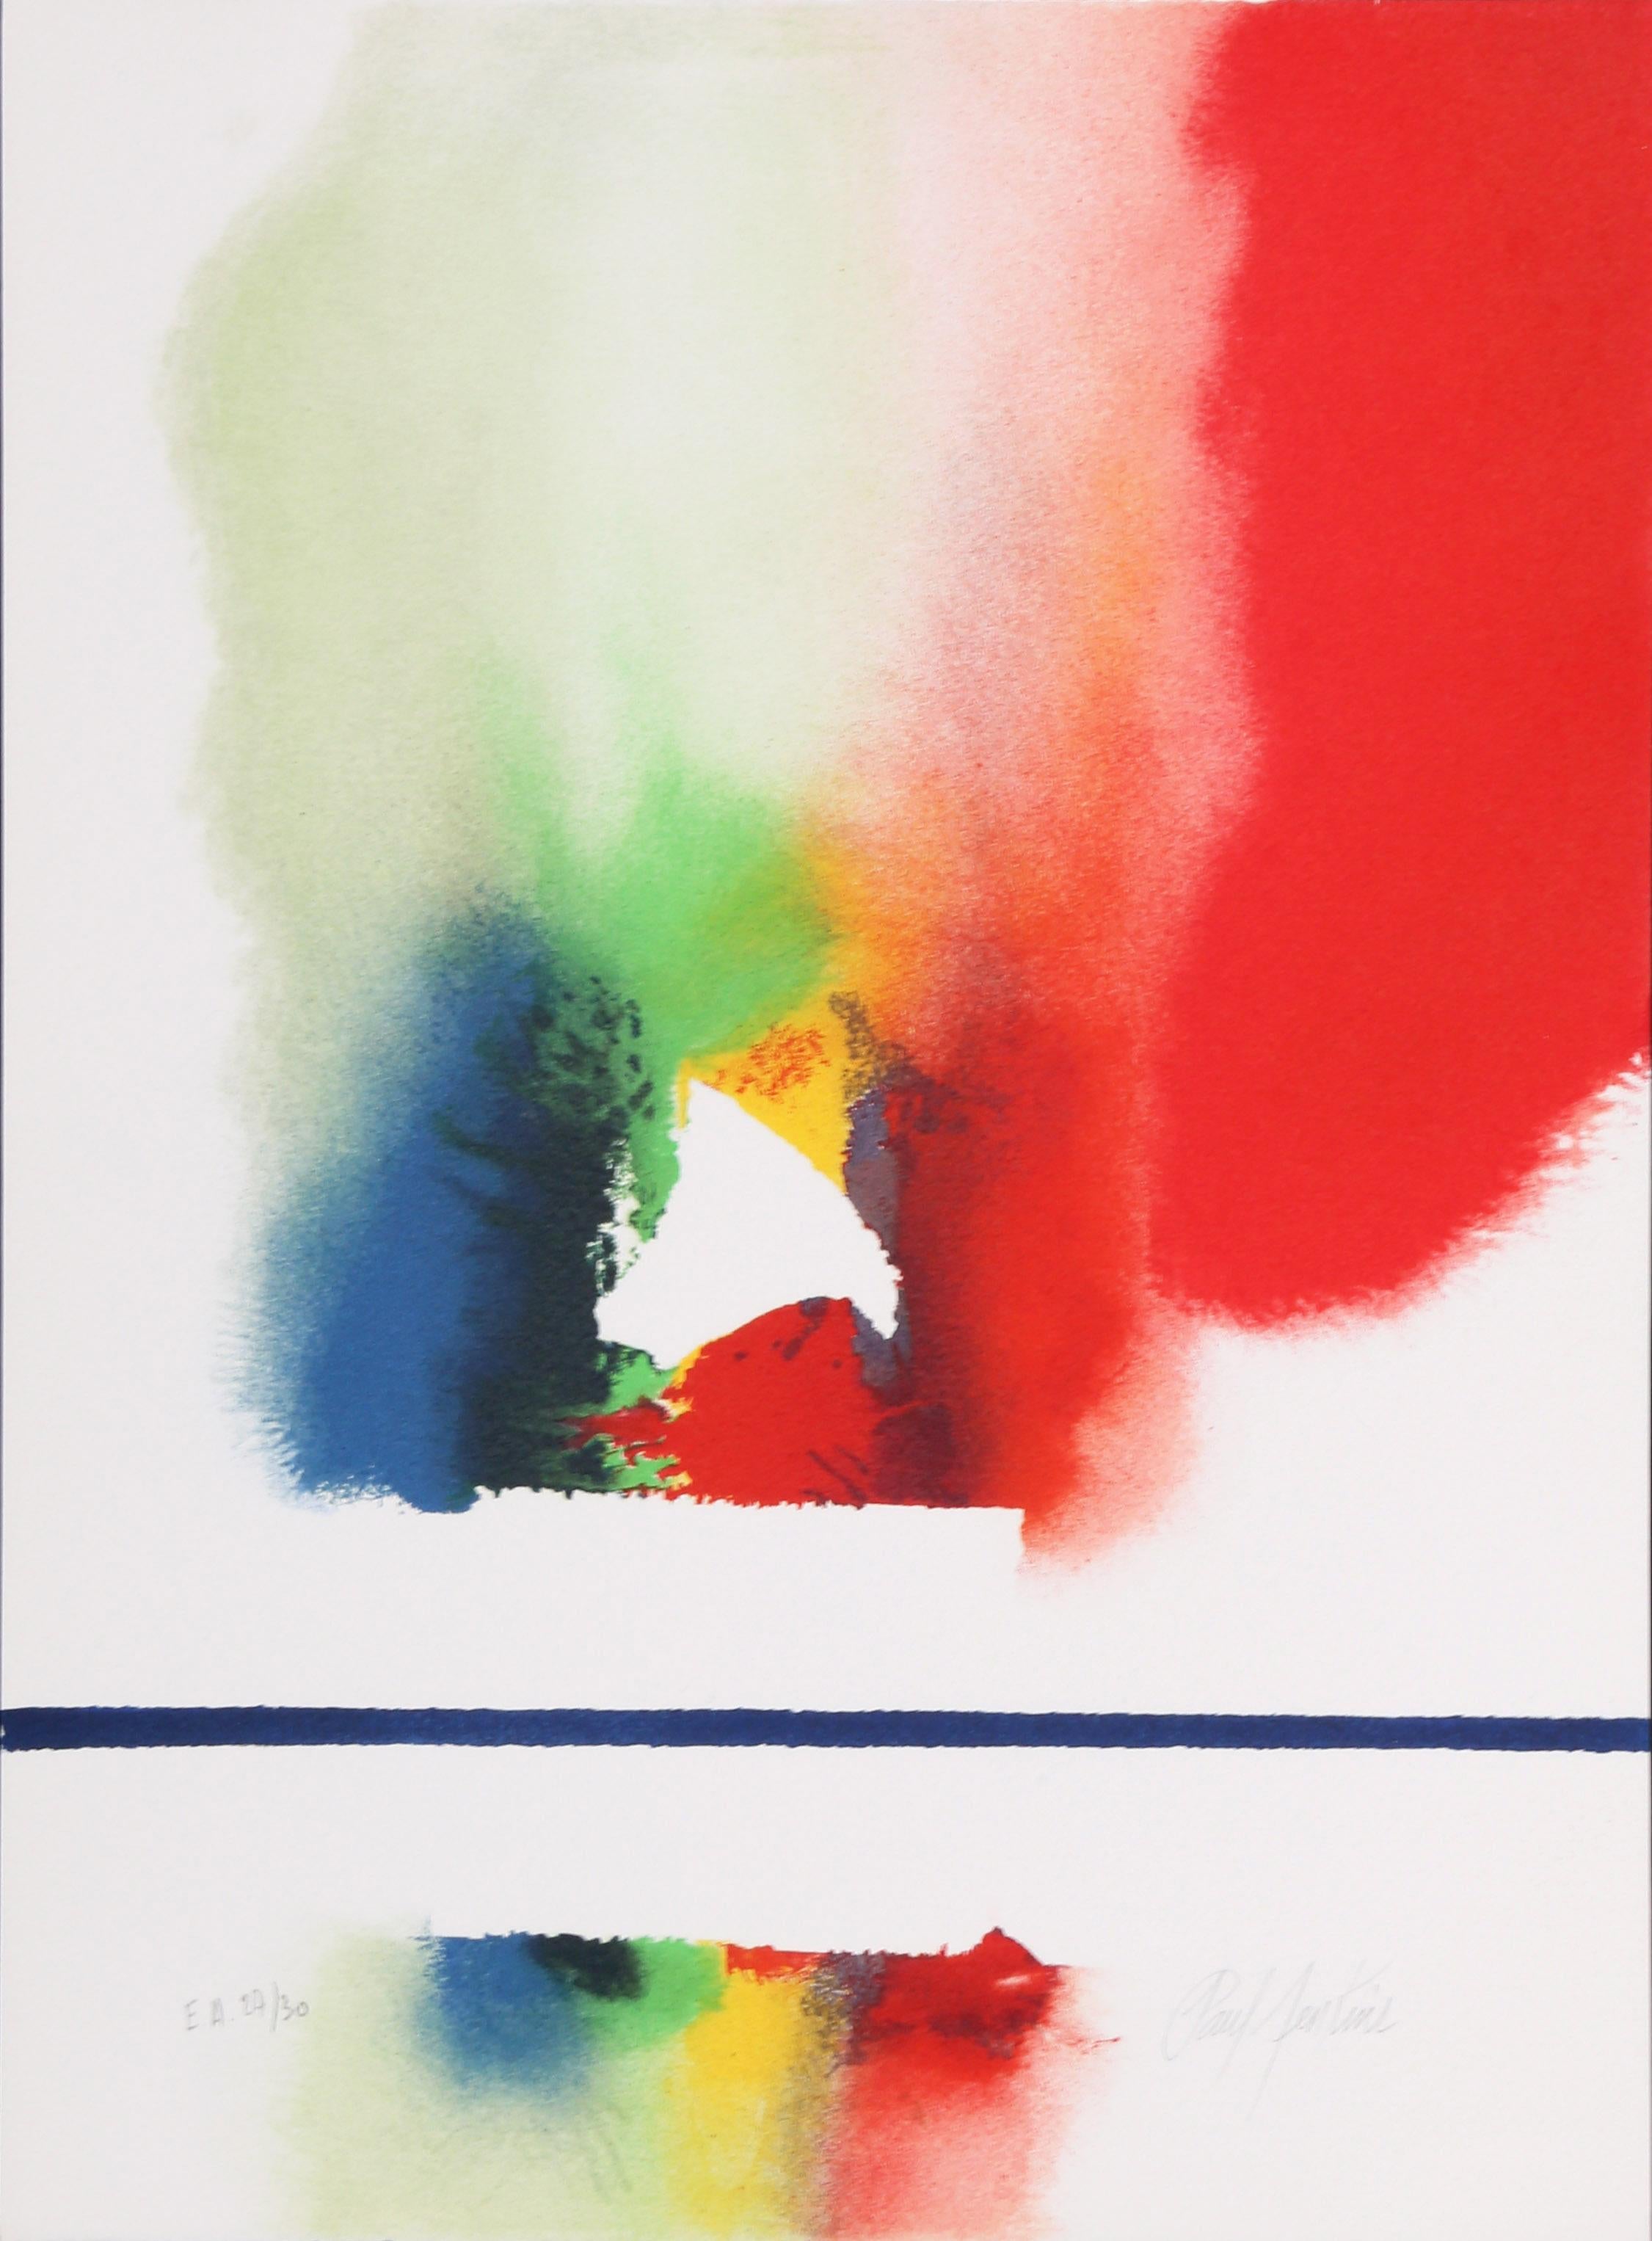 A lithograph from the portfolio "Le Couleur est un Chemin" or "The Color is a Path", a collection by Paul Jenkins that also includes several poems. This abstract piece is signed and numbered on the front of the print as well as on the colophon of